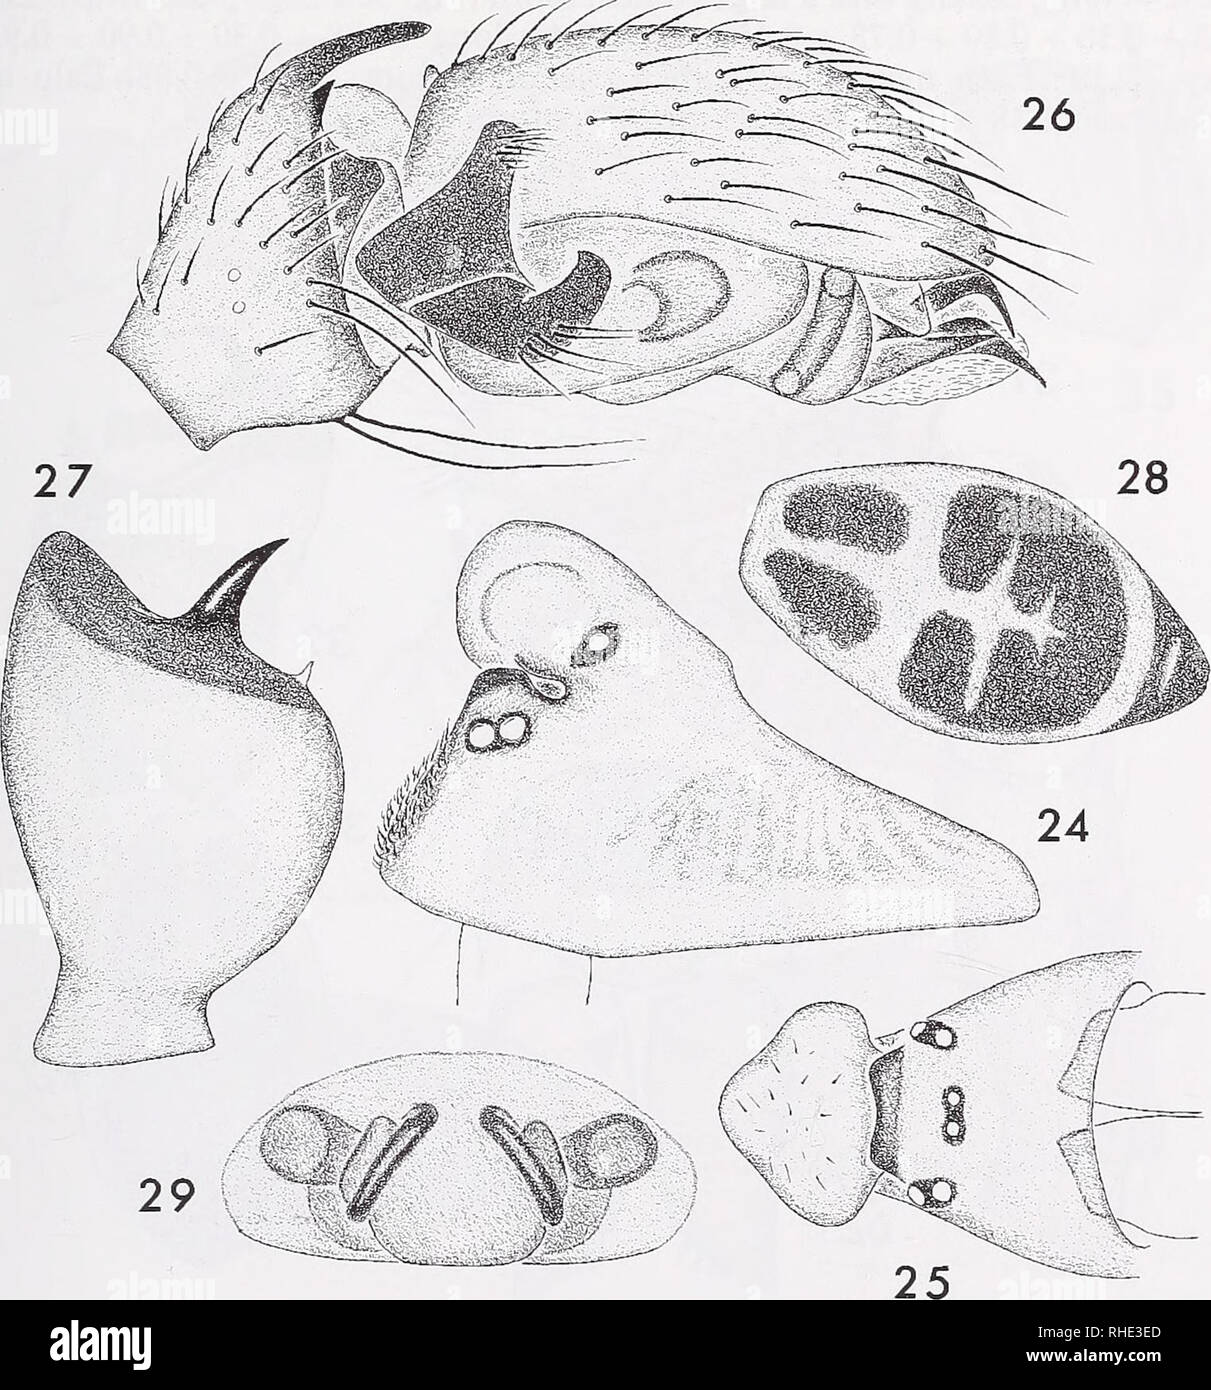 . Bonner zoologische Beiträge : Herausgeber: Zoologisches Forschungsinstitut und Museum Alexander Koenig, Bonn. Biology; Zoology. New Oedothorax Bertkau, 1883, from Nepal 435 Oedothorax tholusus n. sp., Figs 24—29. Material: Holotype male (SMF), Nepal, Kaski Distr., above Dhumpus, broadleaved forest, 2100 m, 8.-10. V. 1980, leg. J. Martens &amp; A. Ausobsky. — Paratype: 1 female (SMF), same locality, together with holotype, leg. J. Martens &amp; A. Ausobsky. Diagnosis: This species is easily distinguished by the shape of the male carapace, small suprategular apophysis, absence of a scapuliform Stock Photo